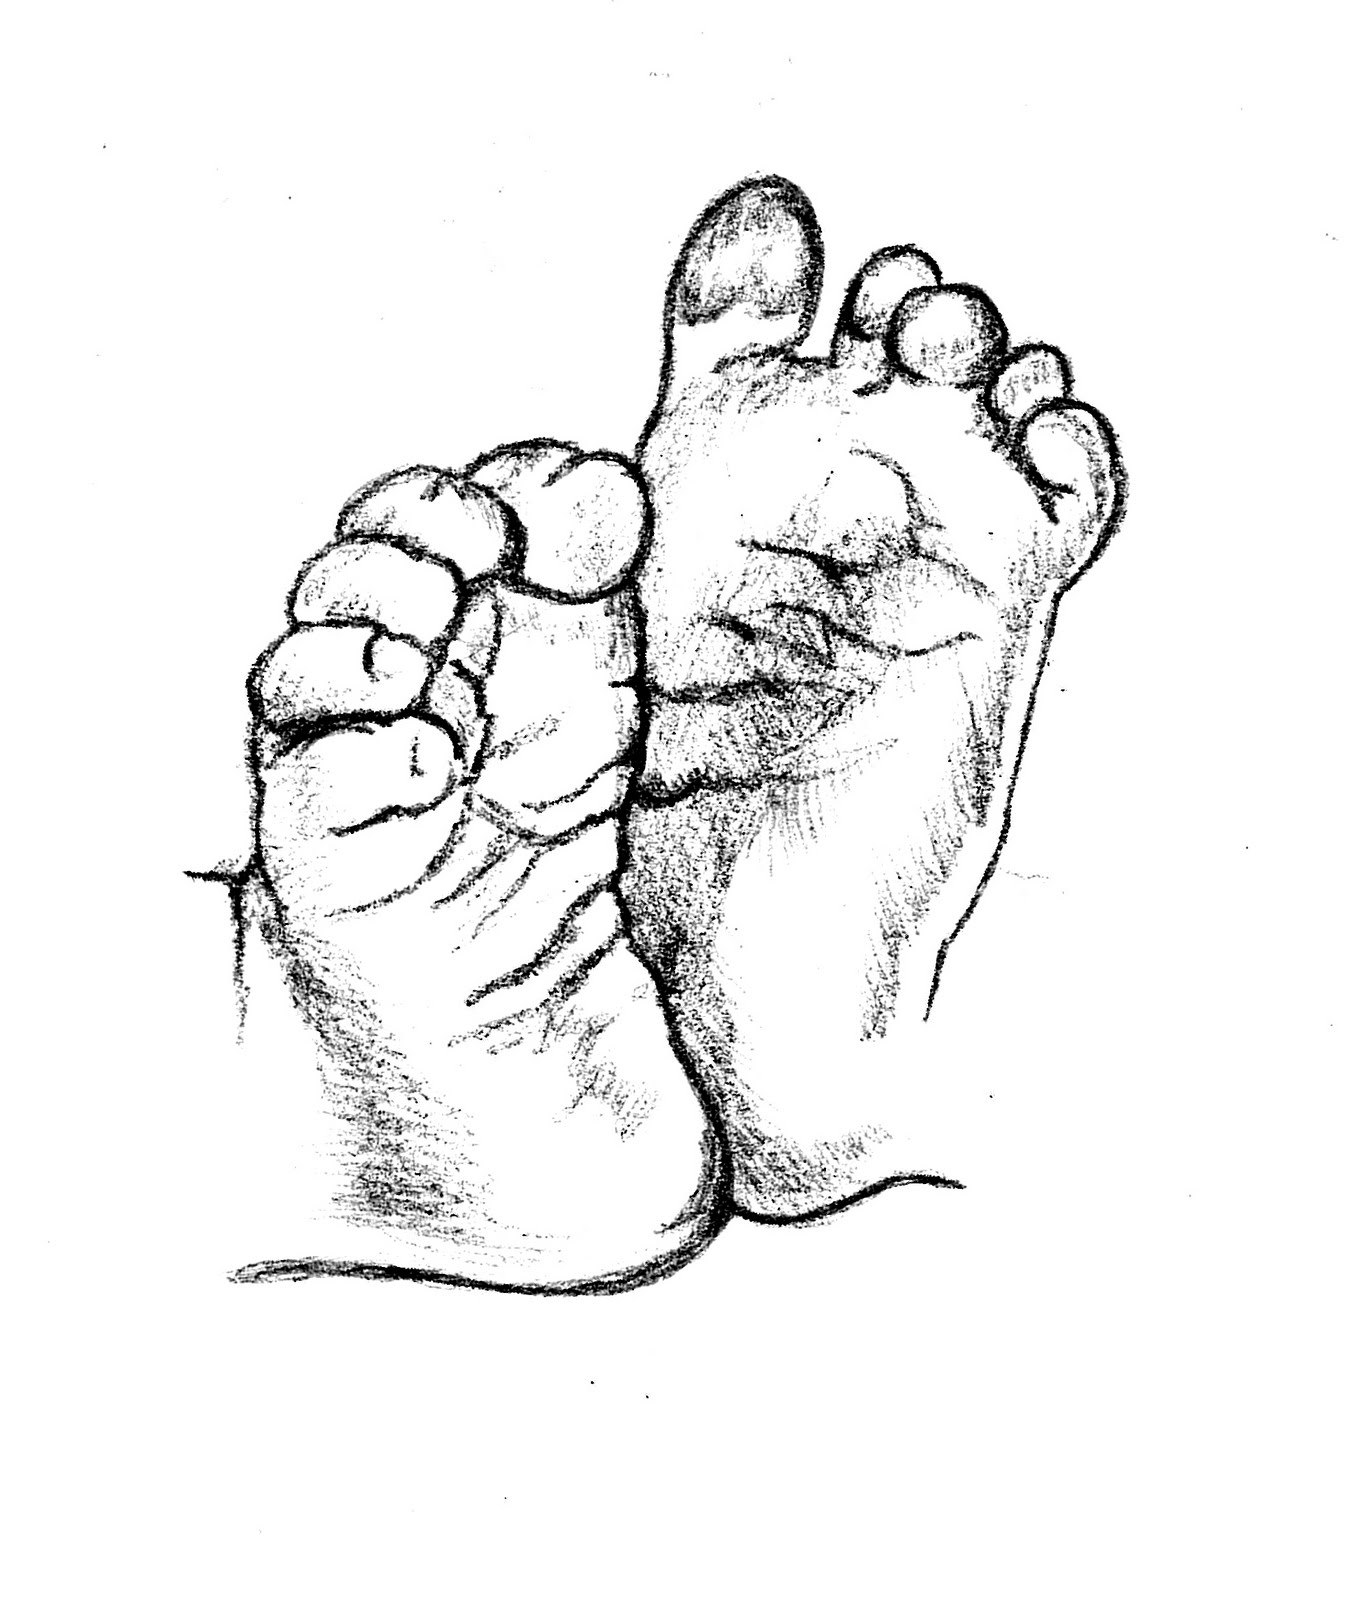 Baby Feet Drawings   Clipart Best